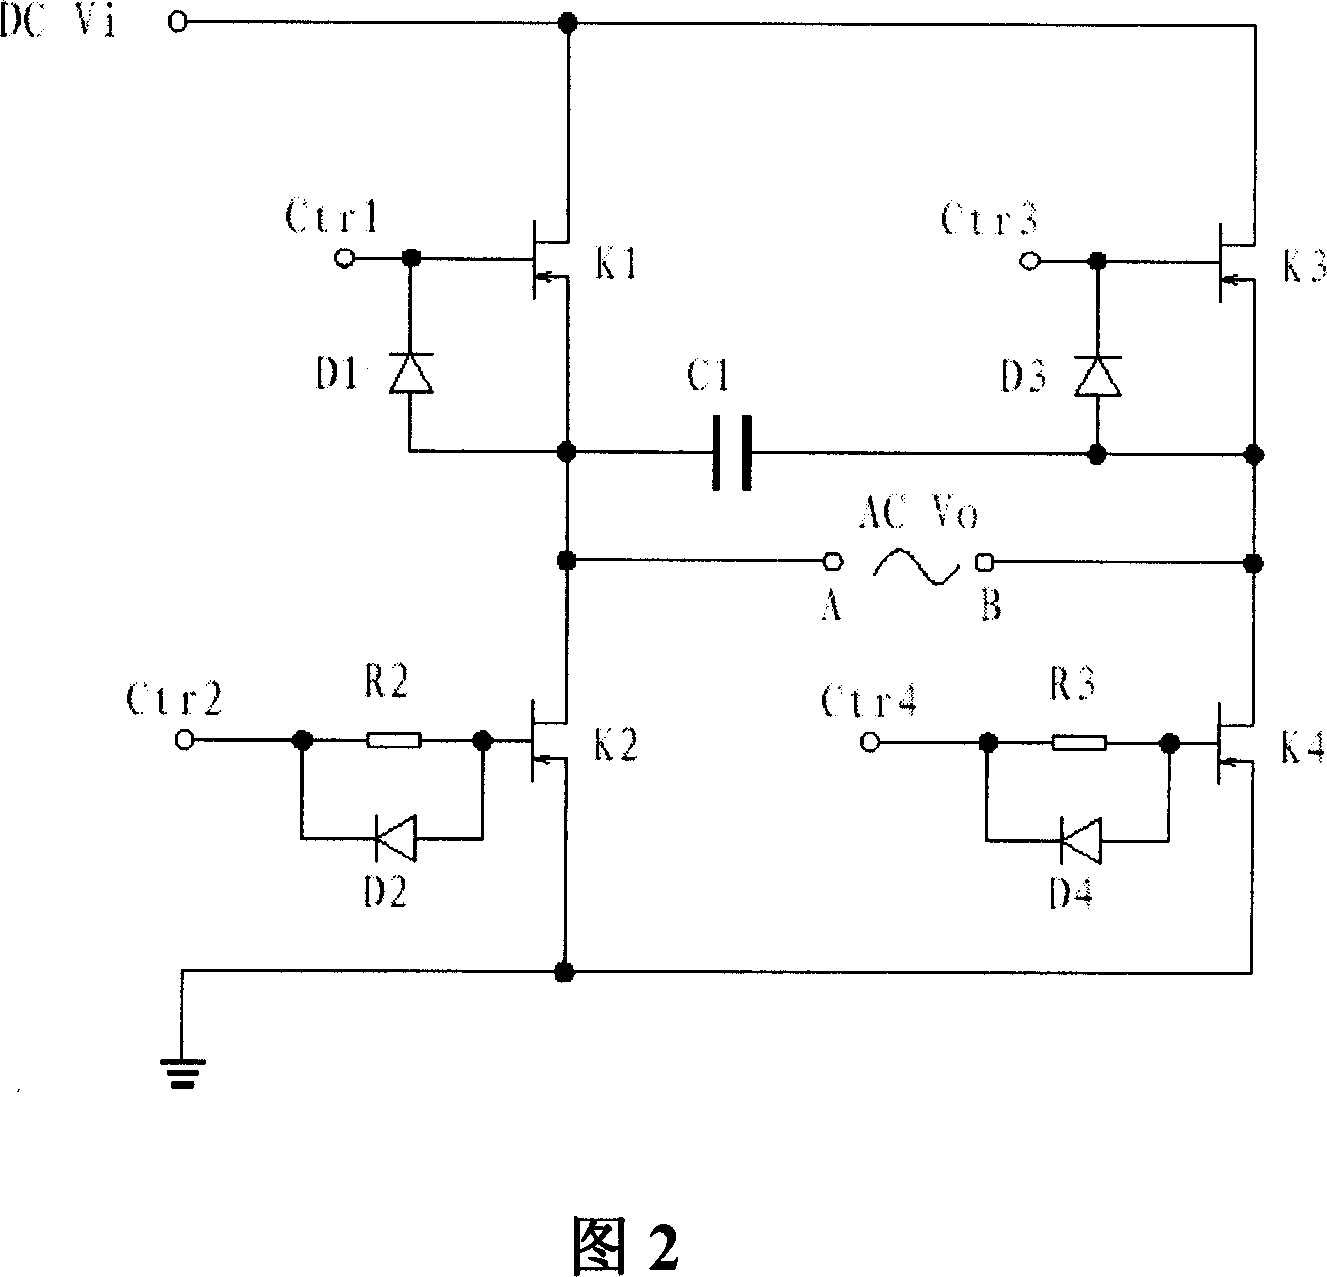 Battery pack system capable of providing ac voltage